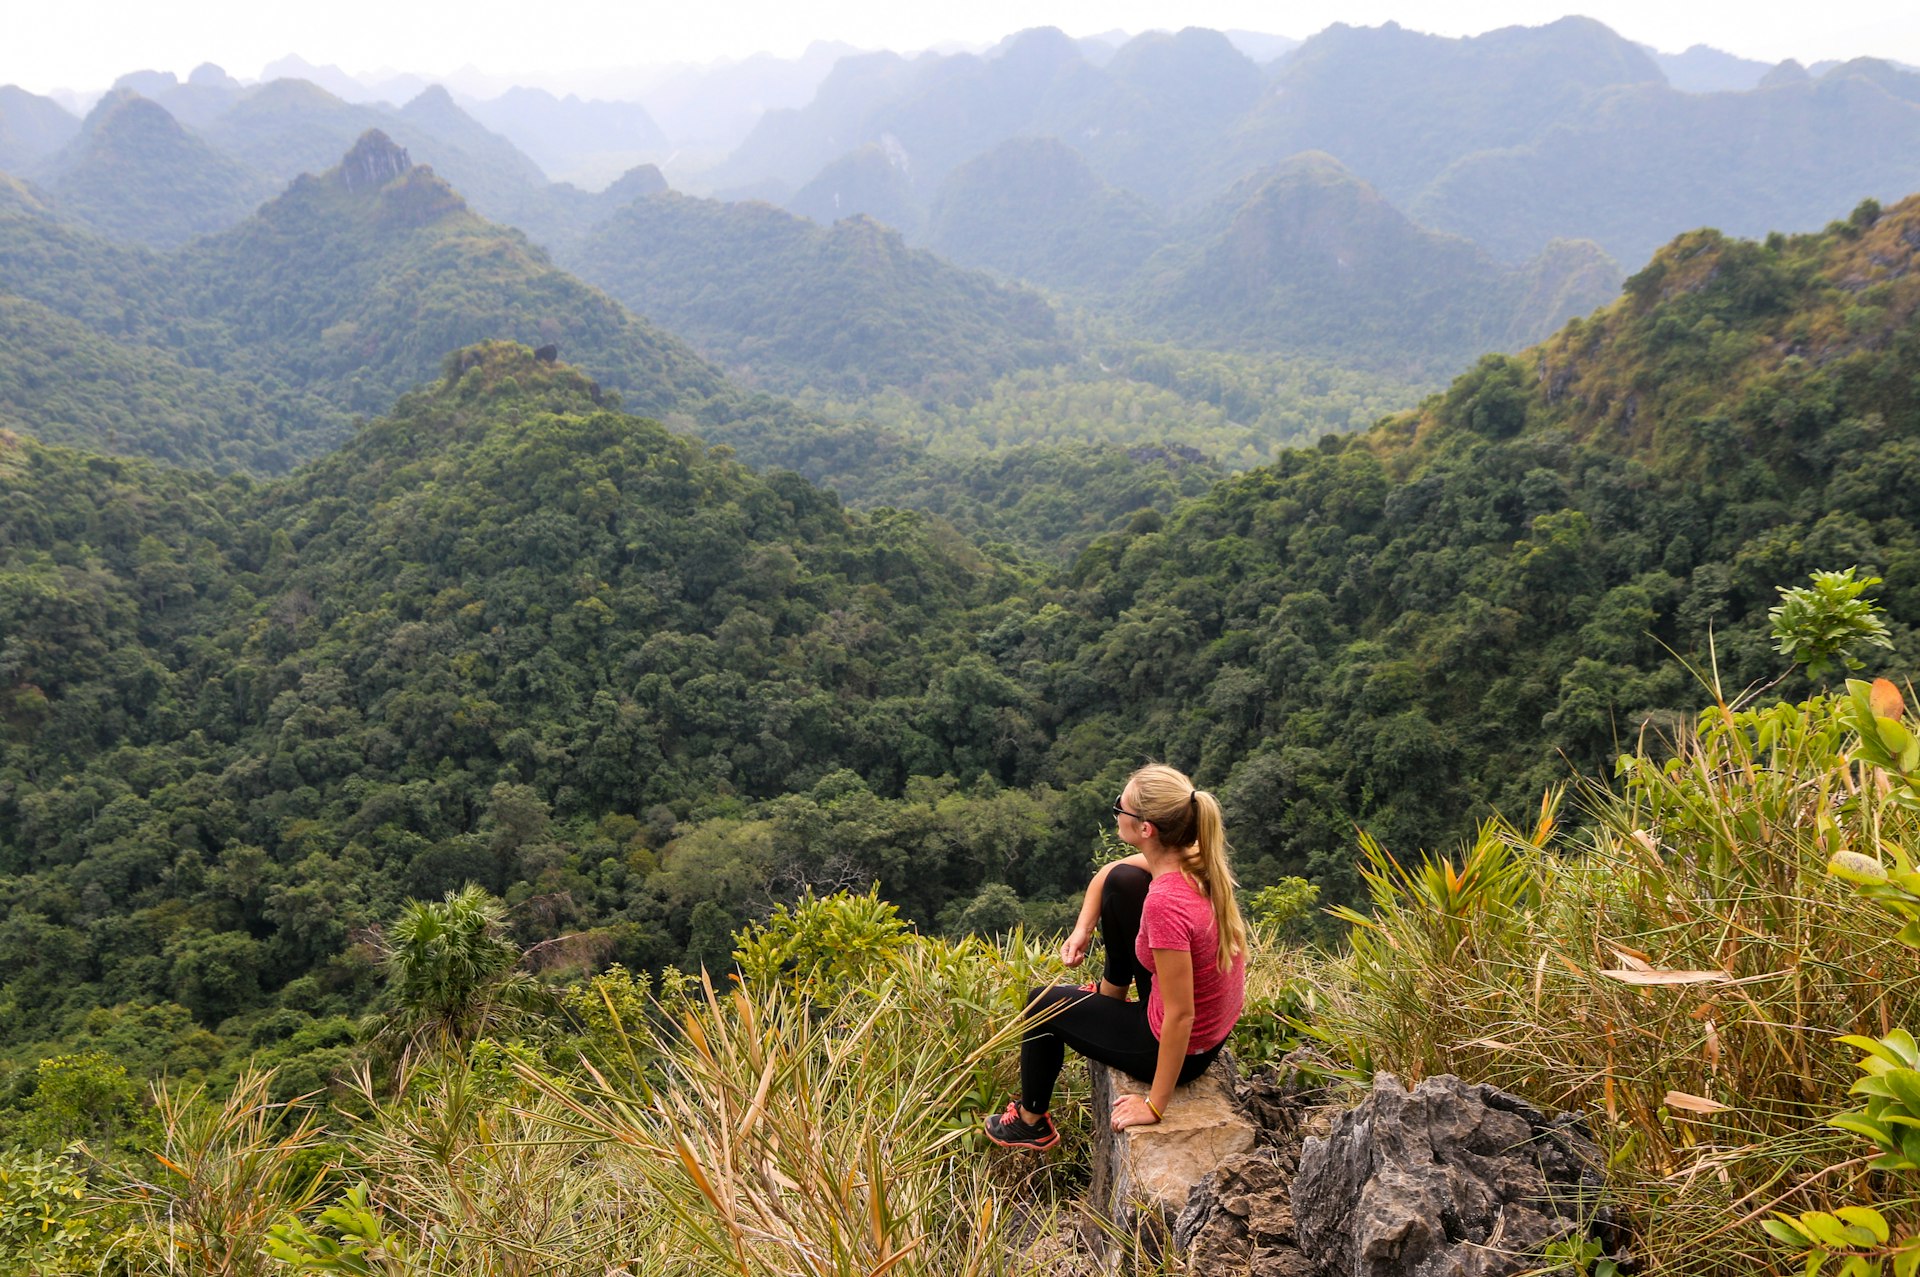 A young woman sitting on a rocky edge and looking at the hills of Cat Ba National Park. The surrounding hills are covered in green forest.